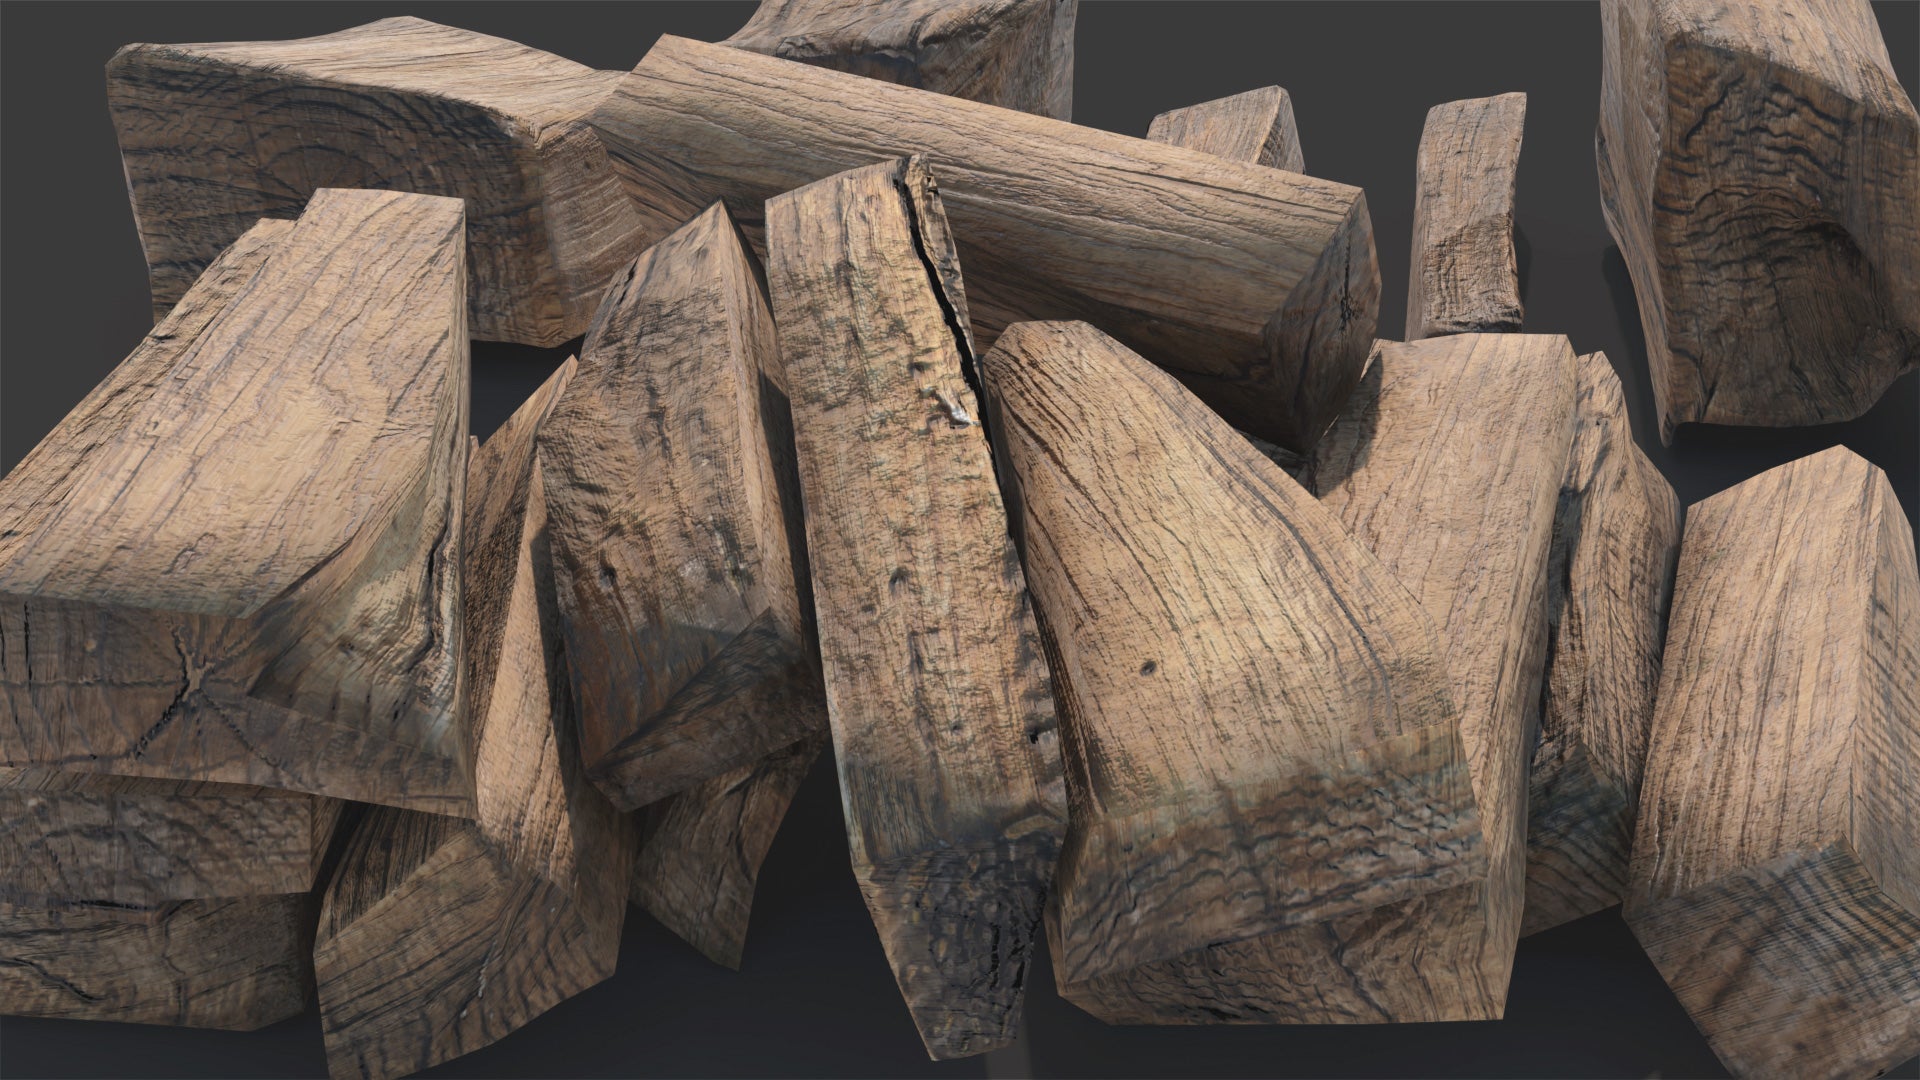 Closeup of a 3D model of neatly cut lumber. The textures are rough and the wood looks a bit dry.